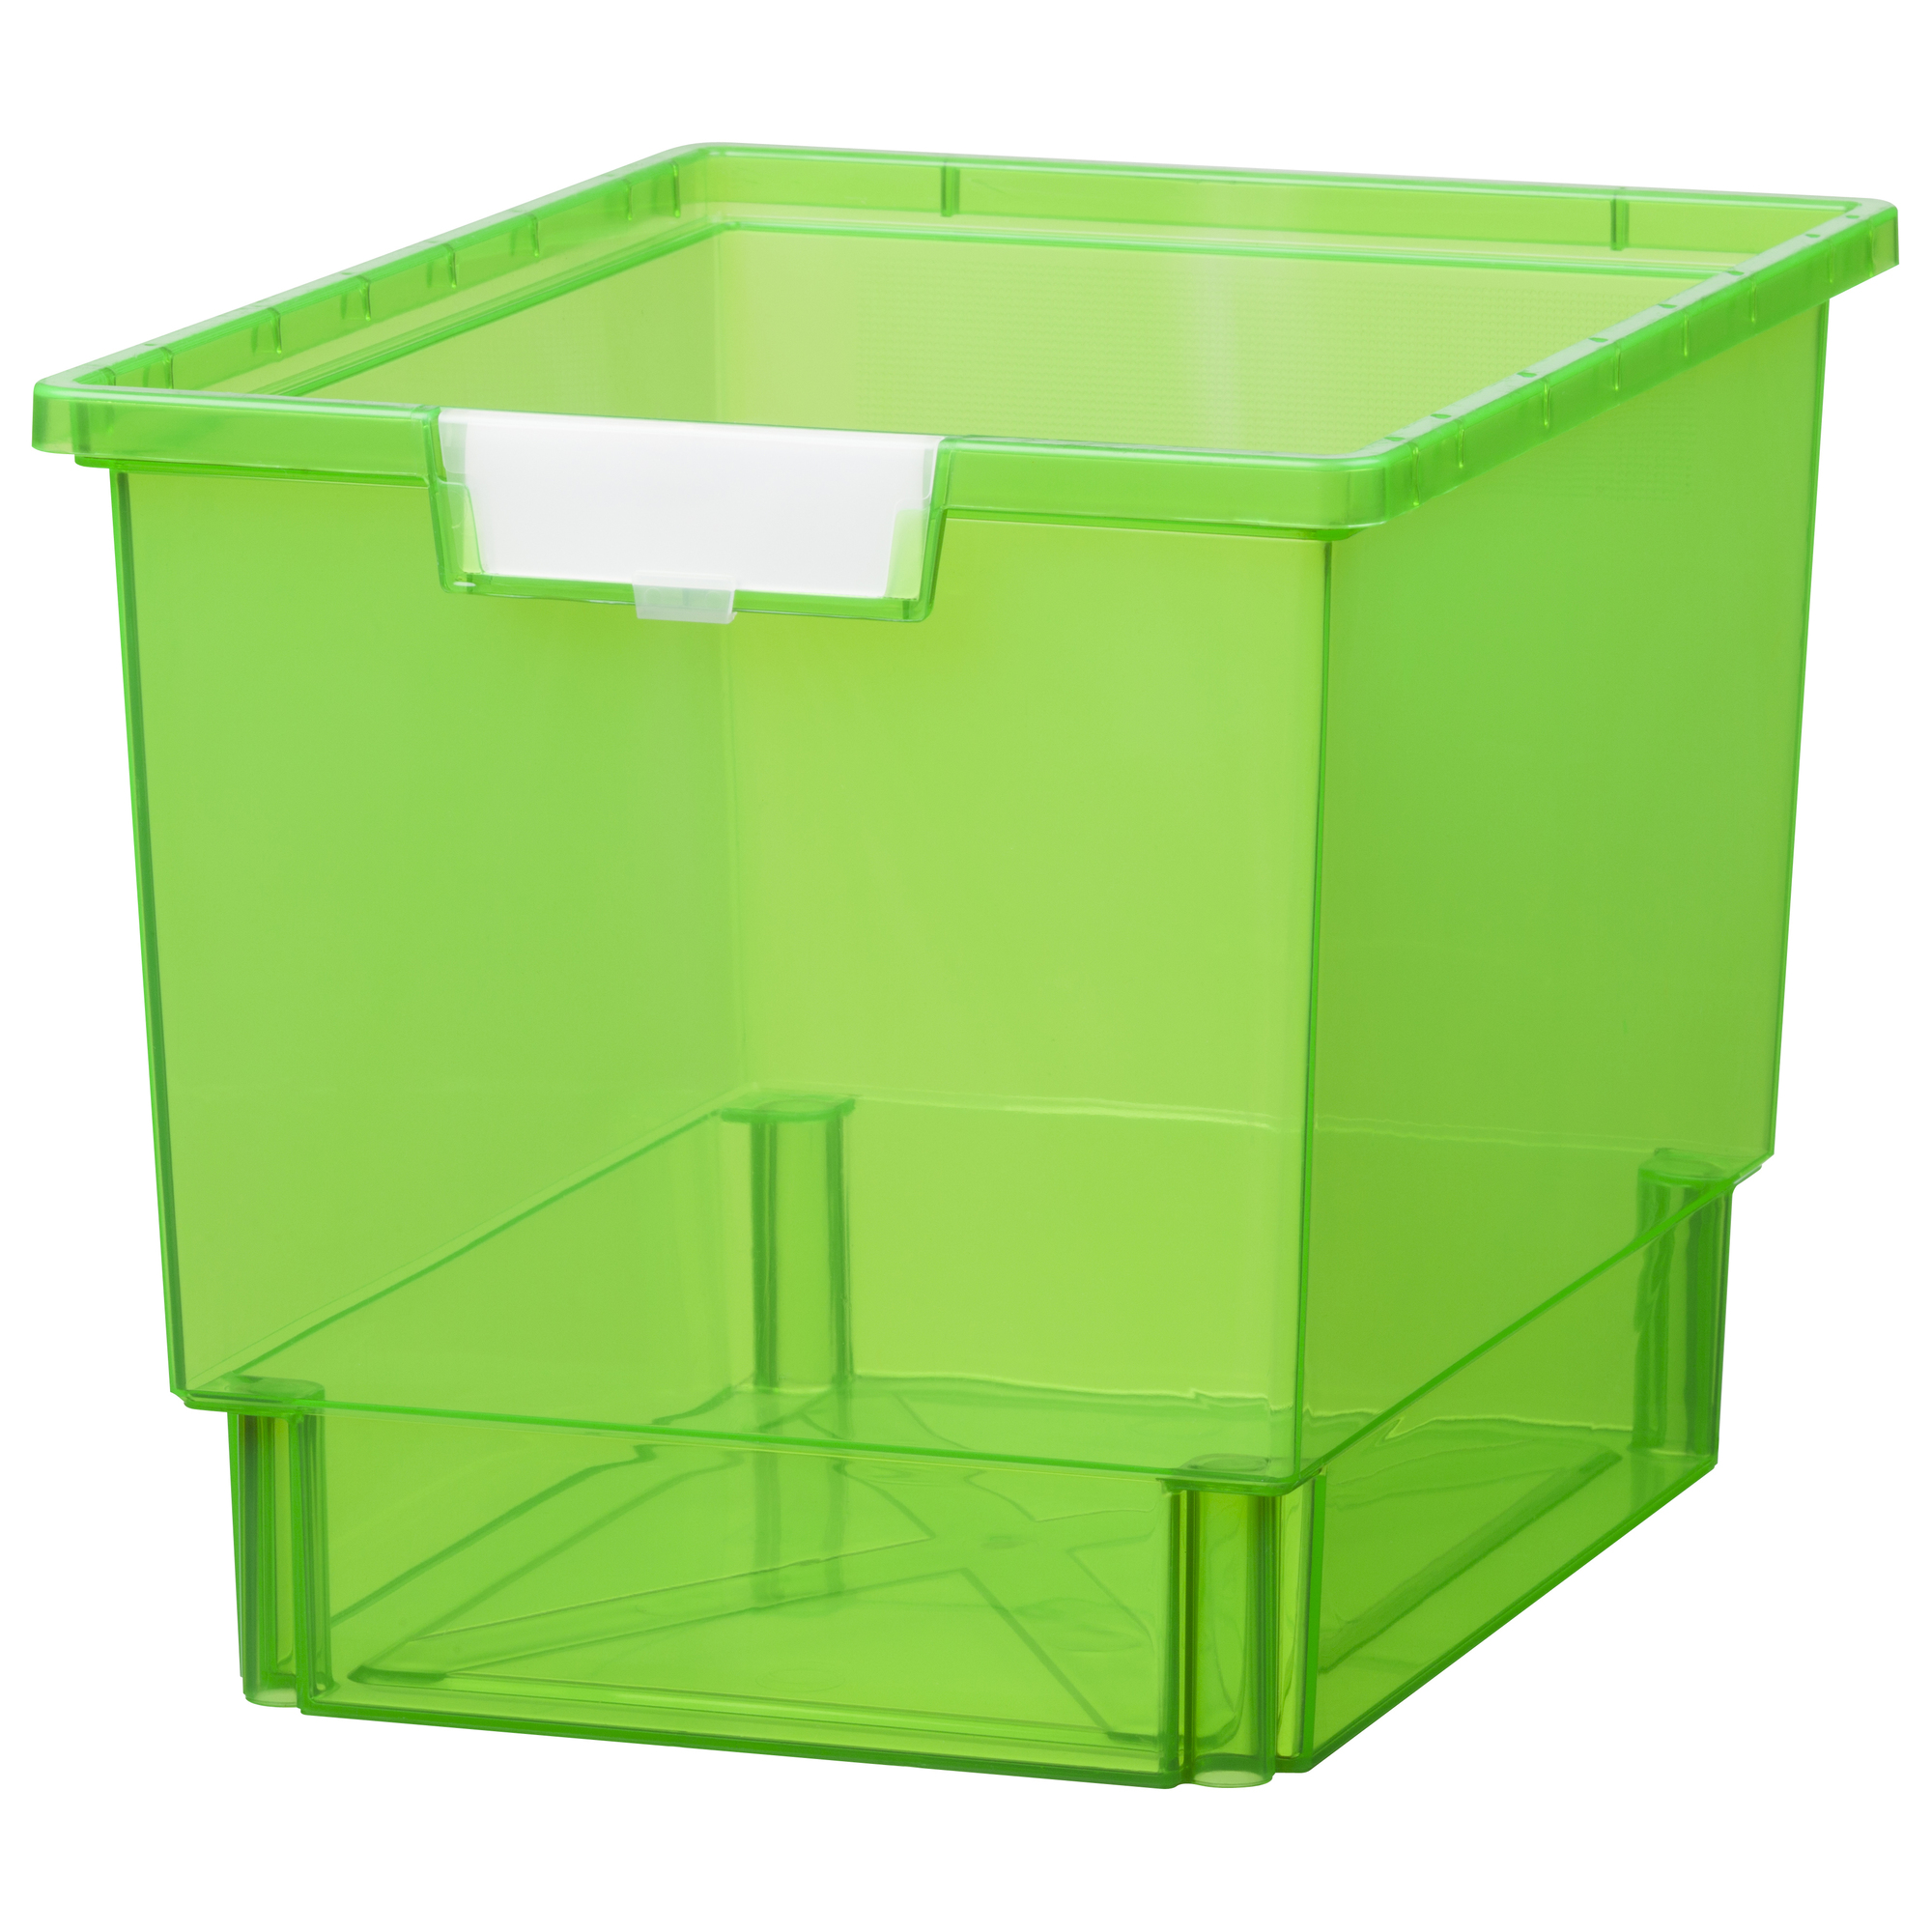 Certwood StorWerks, Slim Line 12Inch Tray in Neon Green - 1 Pack, Included (qty.) 1, Material Plastic, Height 9 in, Model CE1954FG1